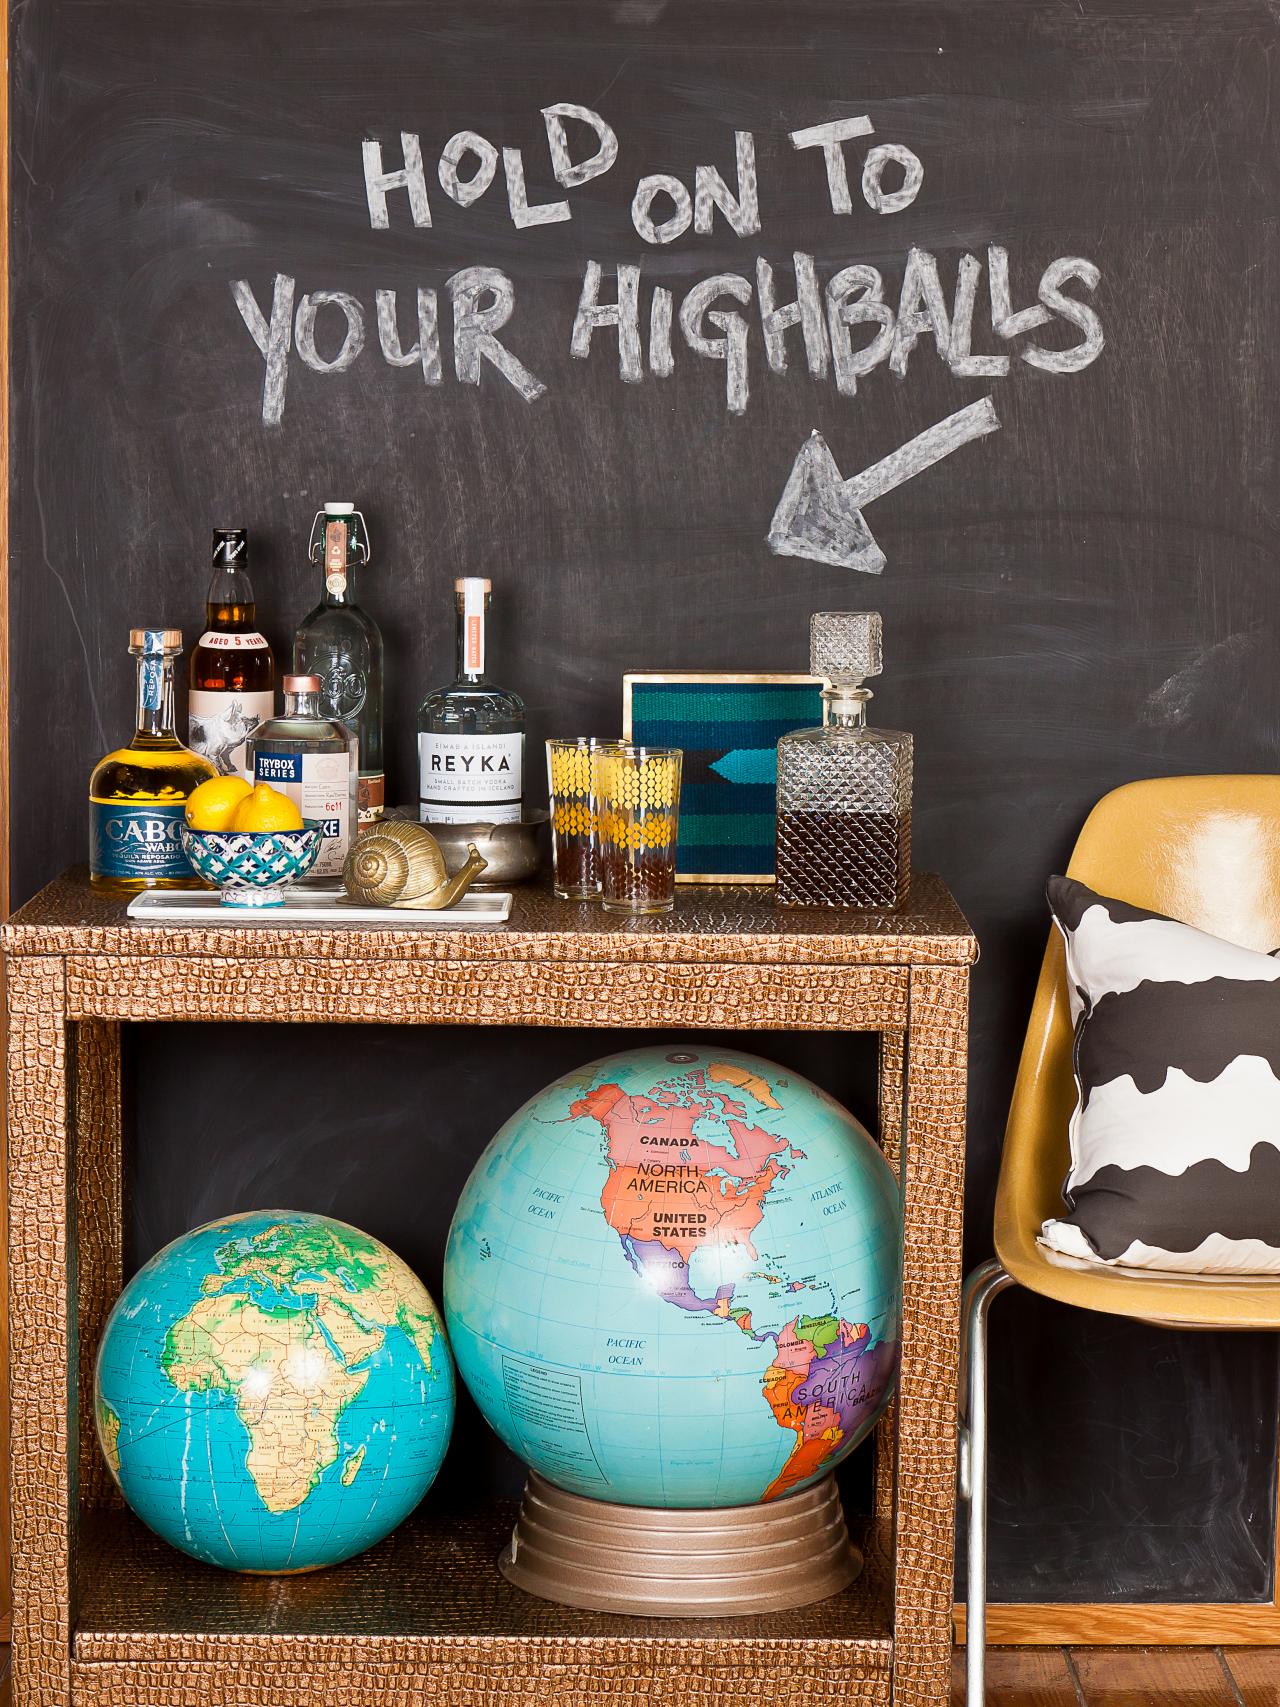 All About Chalkboard Paint • Refresh Living